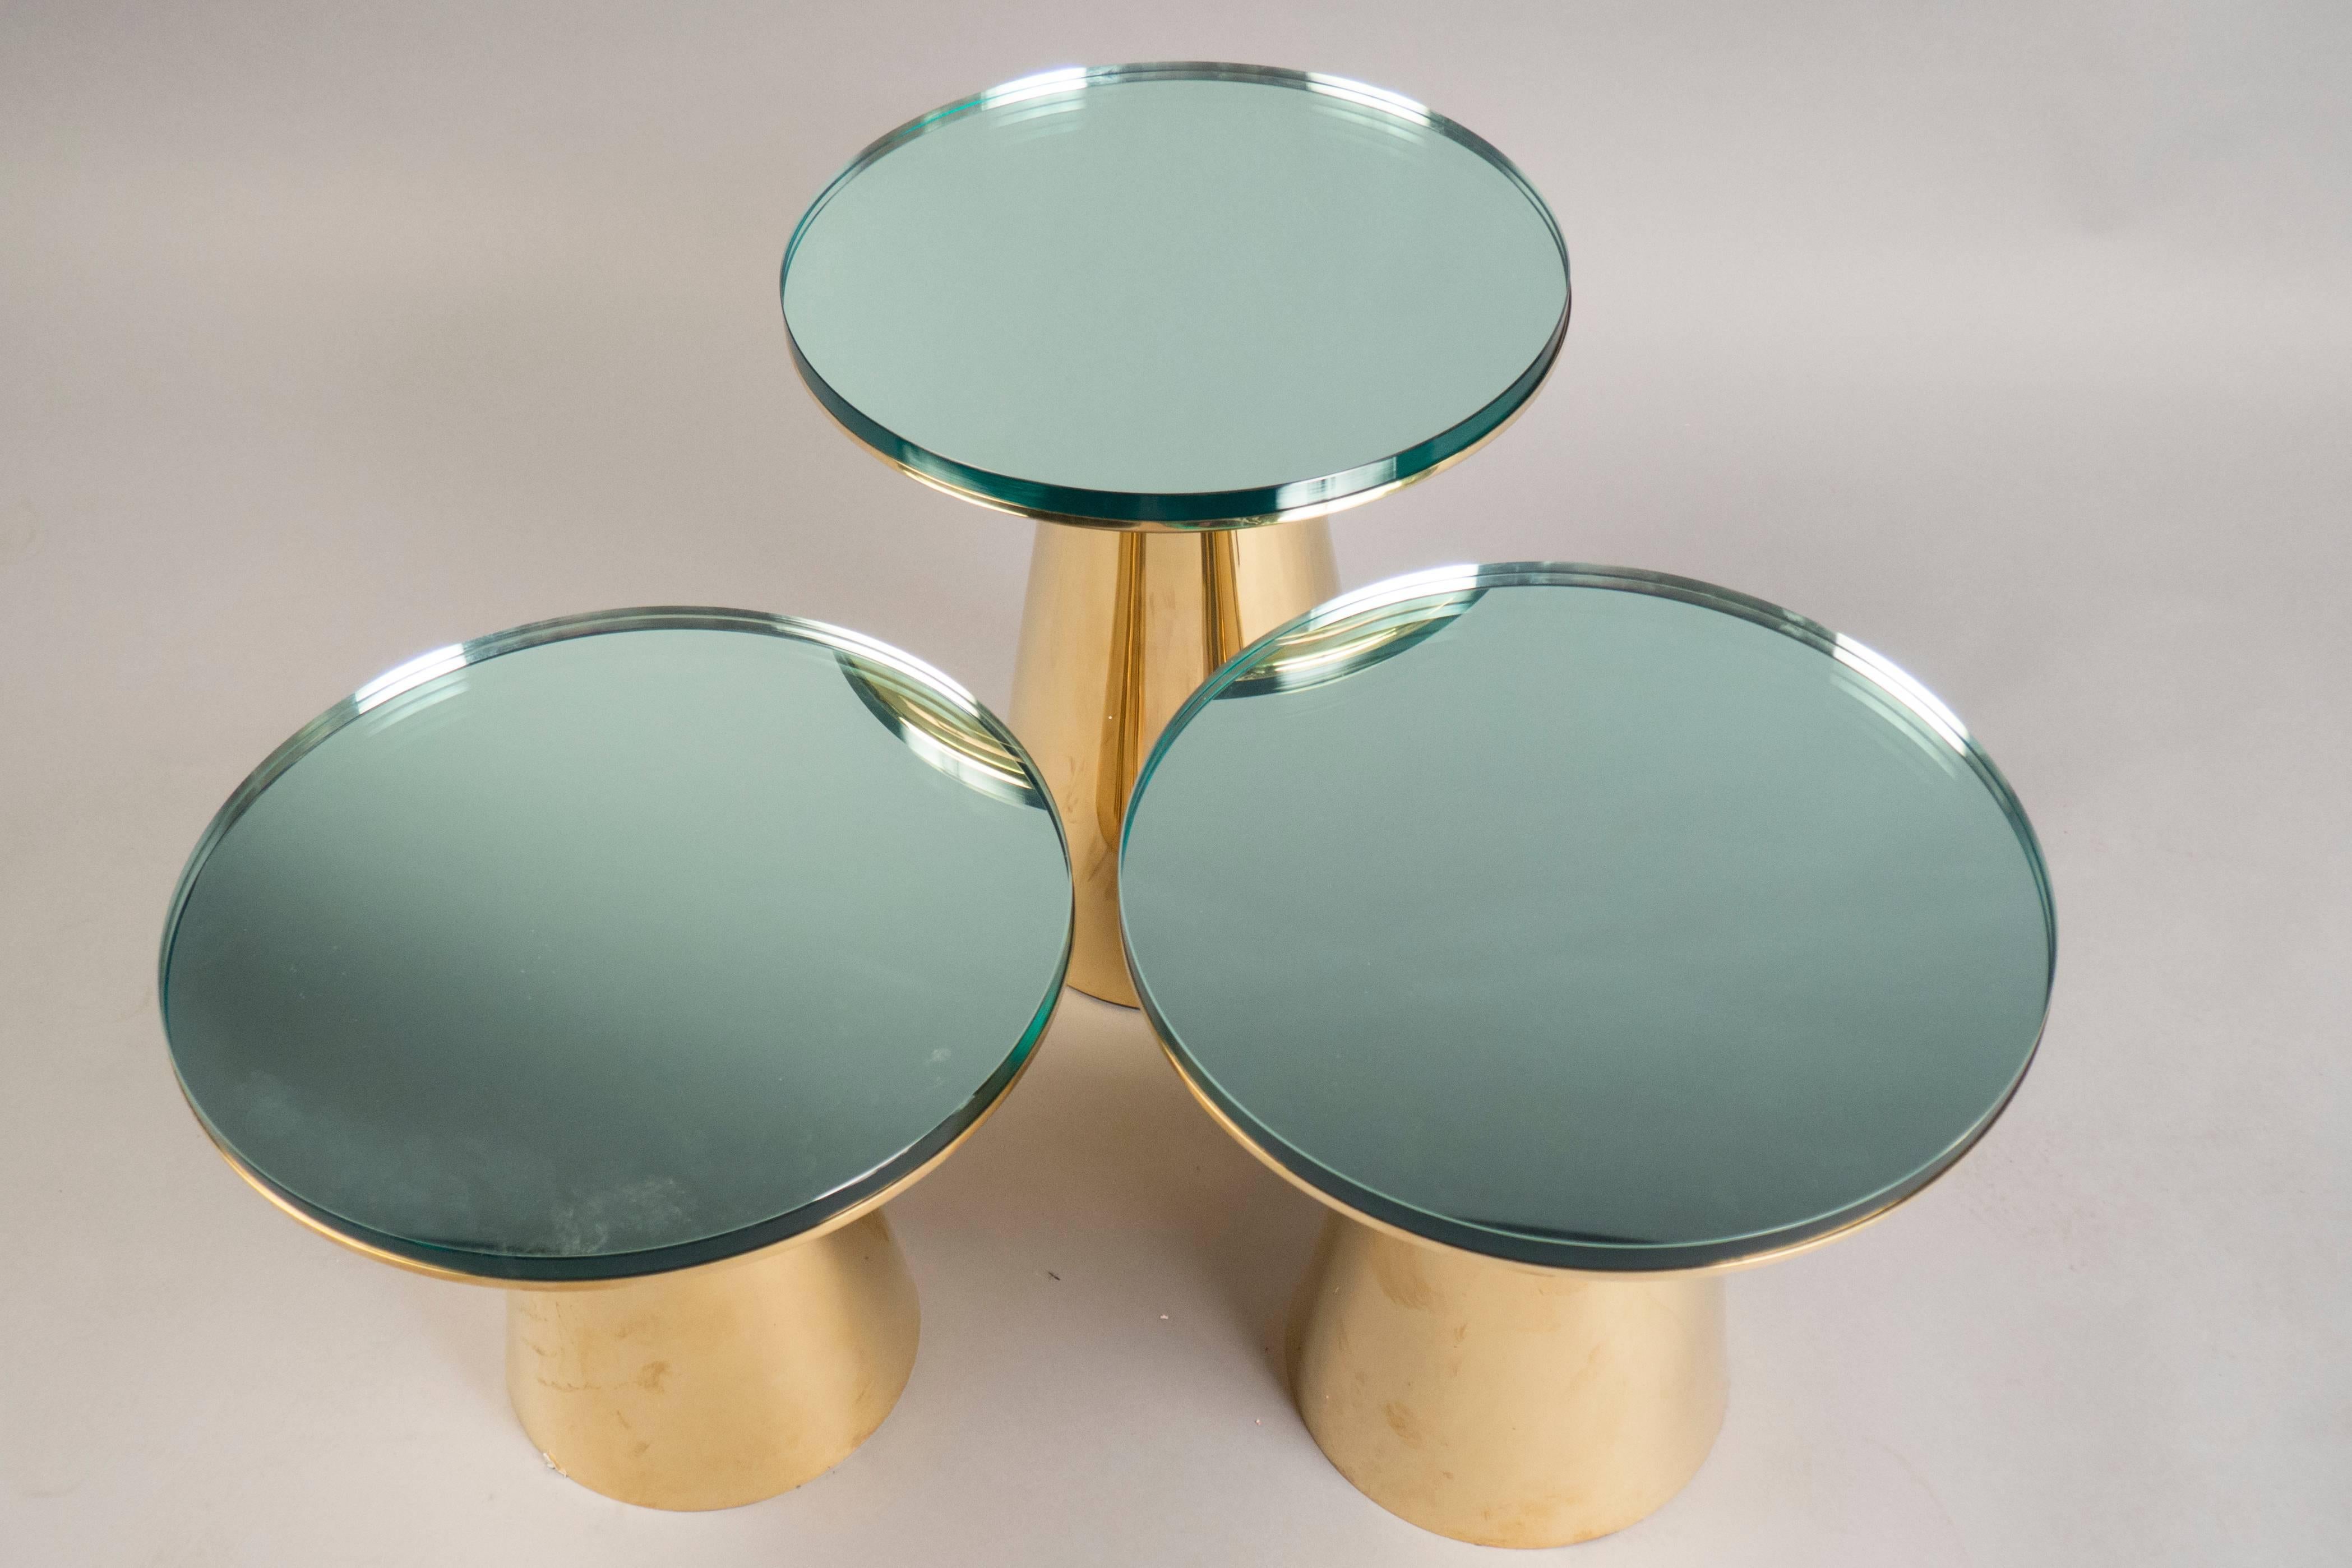 Each table composed of a conical polished brass base, supporting a circular thick mirrored top. 

Table 1: Height: 19.25